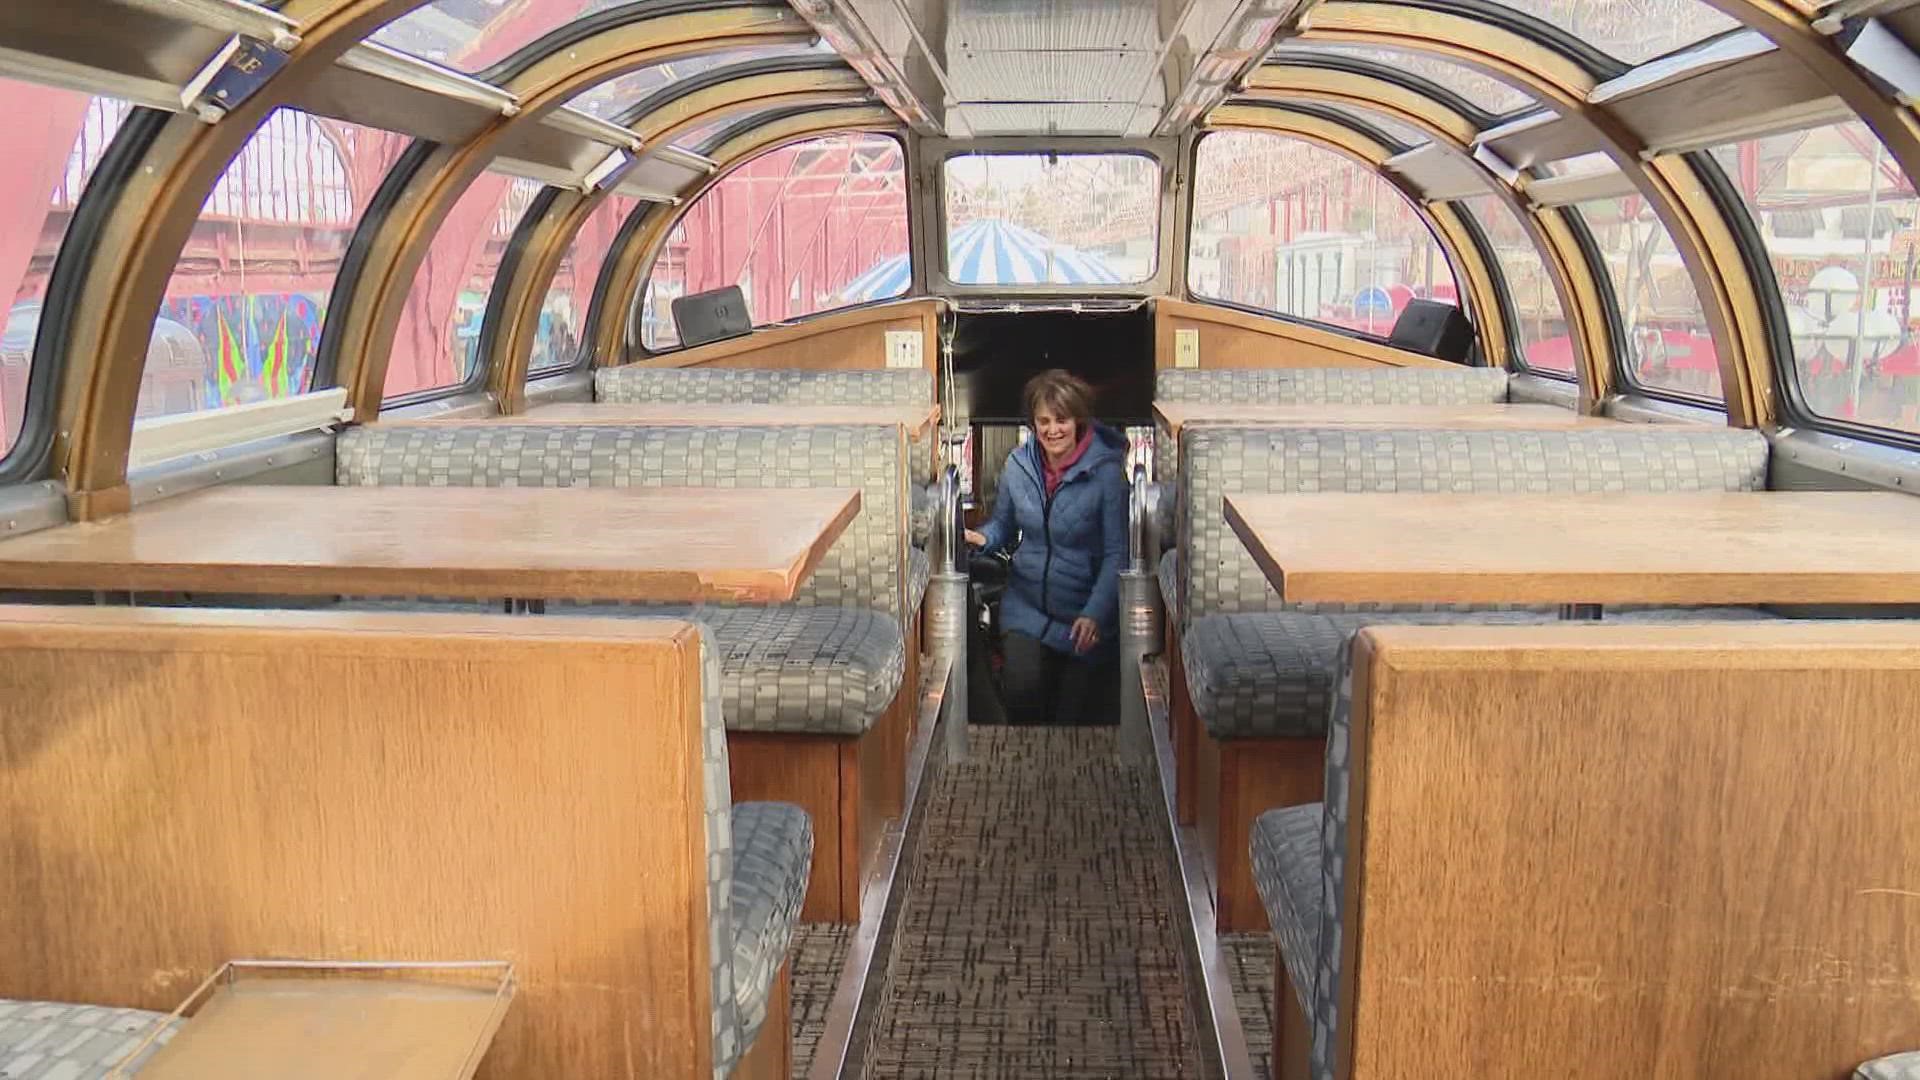 This adults-only train ride offers cool views of the St. Louis skyline on its way to the North Pole.